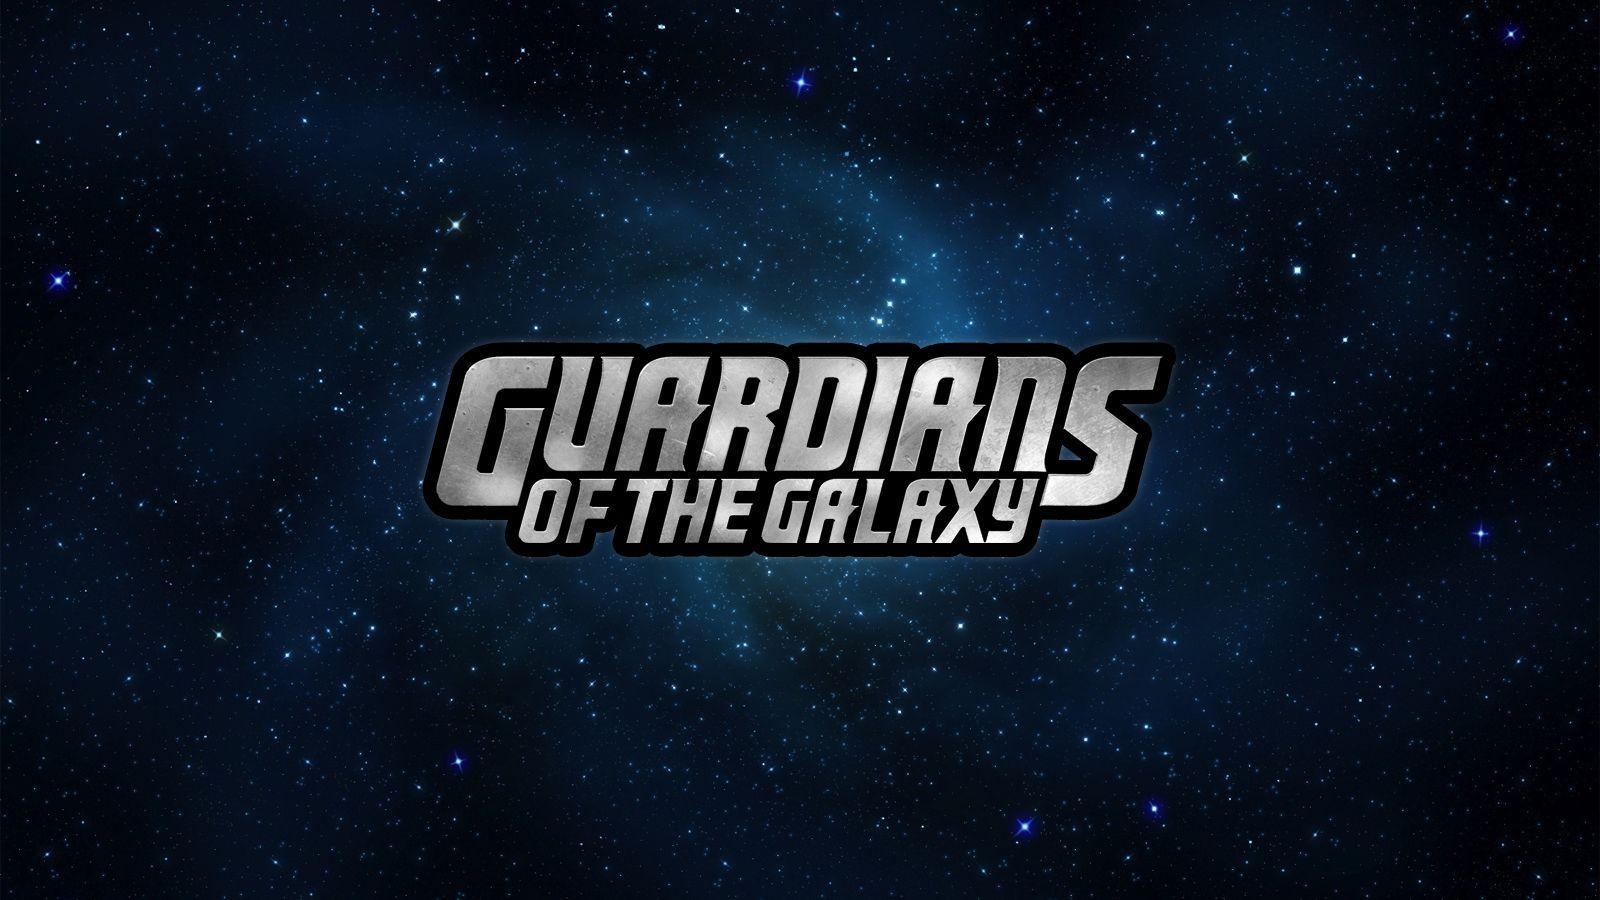 Guardians Of The Galaxy 2023 Wallpaper Download